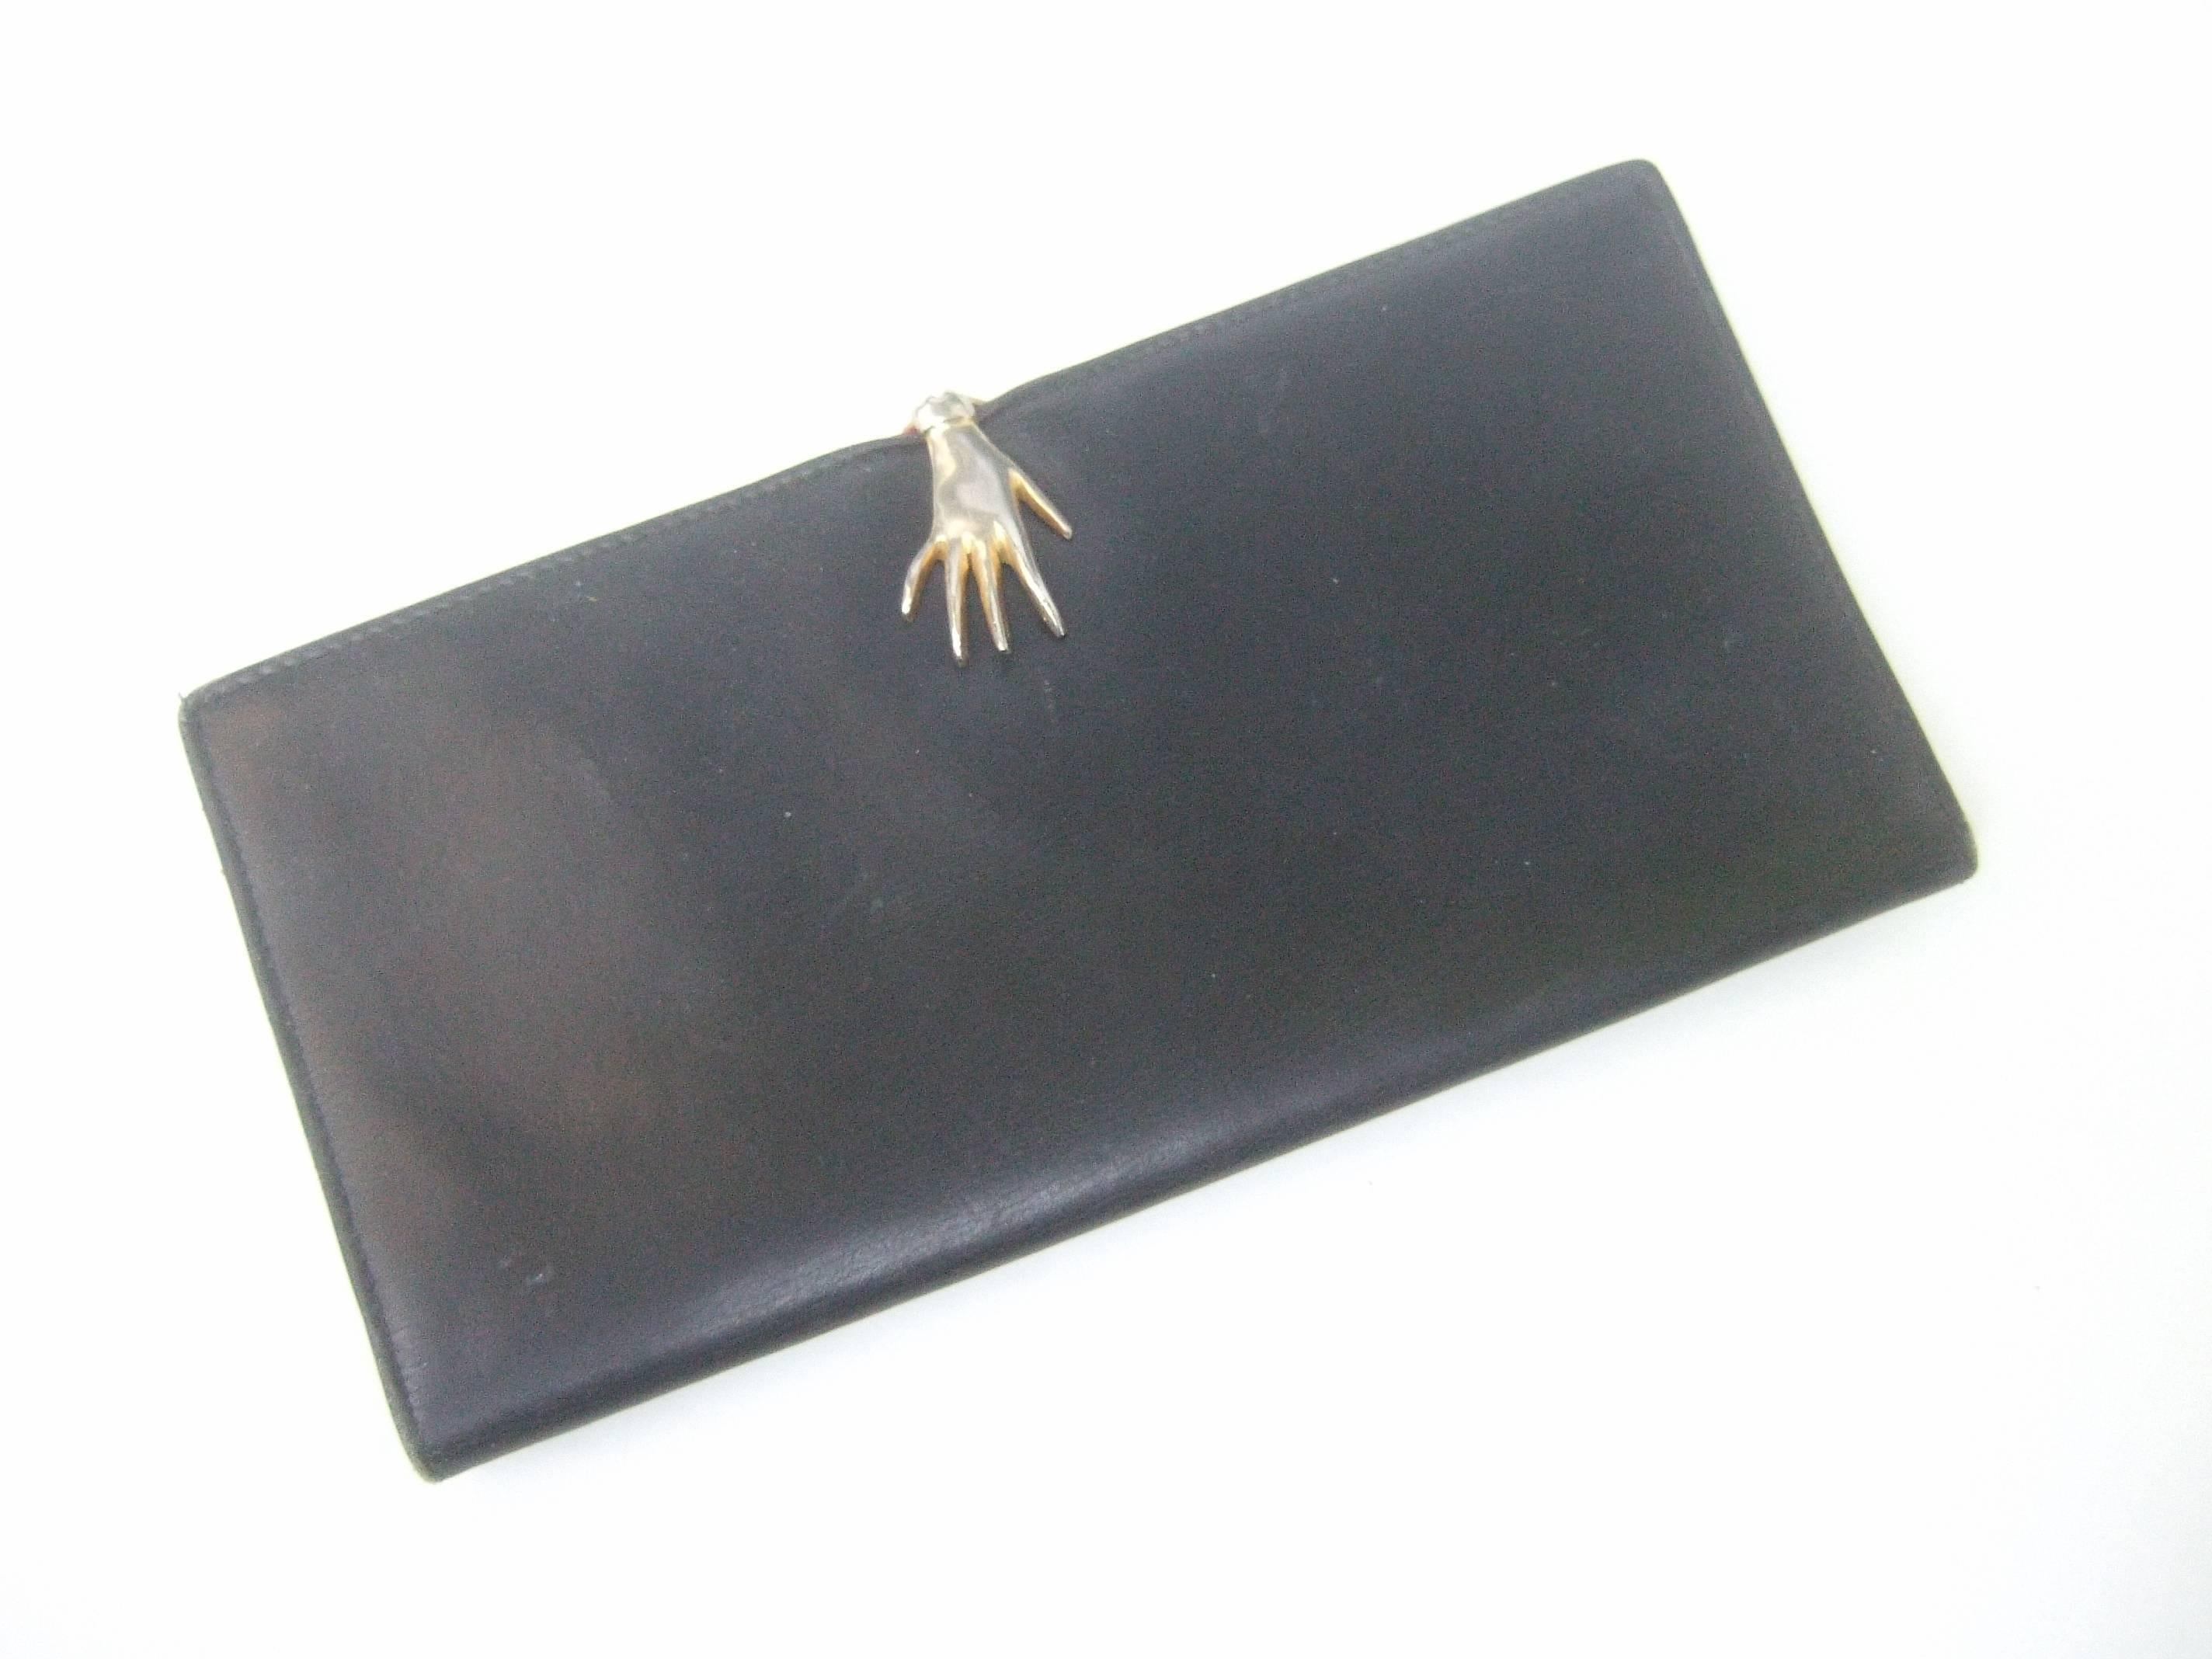 Gucci Rare black leather hand clasp wallet c 1970s
The stylish wallet is adorned with a gilt metal 
hand that serves as the clasp mechanism 

The back exterior is designed with a snap
compartment. The interior is lined in red leather
designed